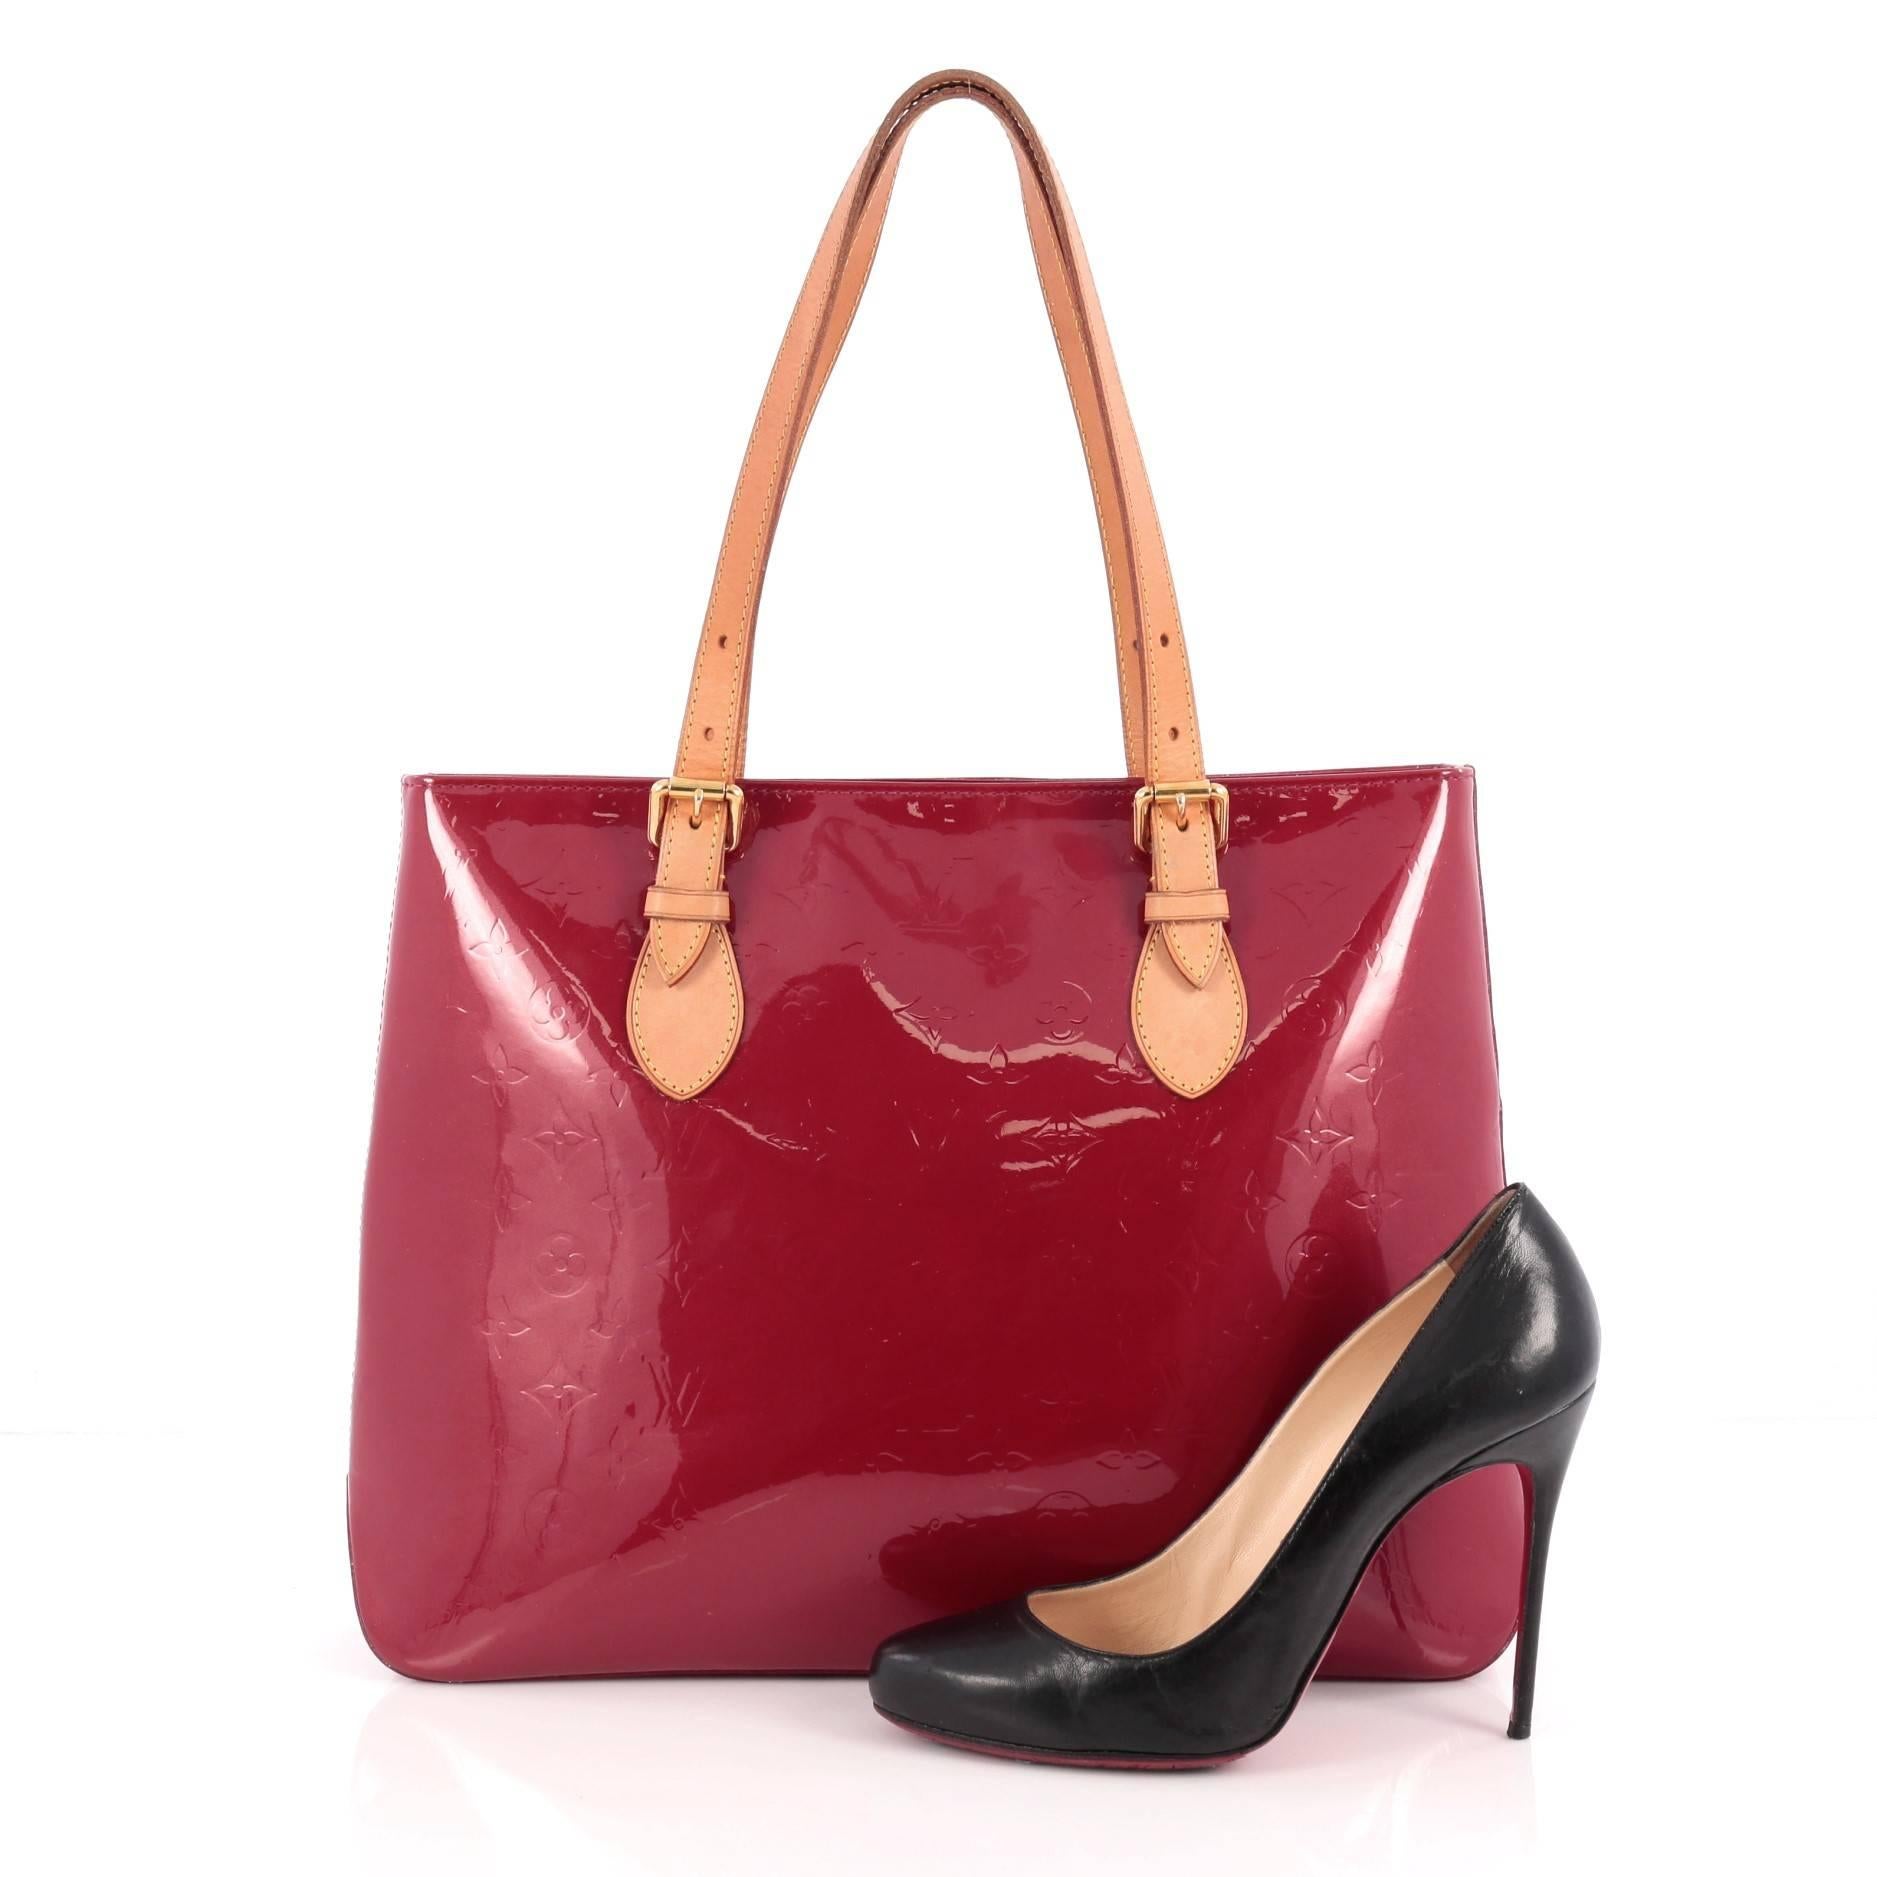 This authentic Louis Vuitton Brentwood Handbag Monogram Vernis is a stylish and functional bag made for everyday use or weekend getaways. Crafted from pomme d'amour red monogram embossed vernis leather, this tote features dual flat tall vachetta